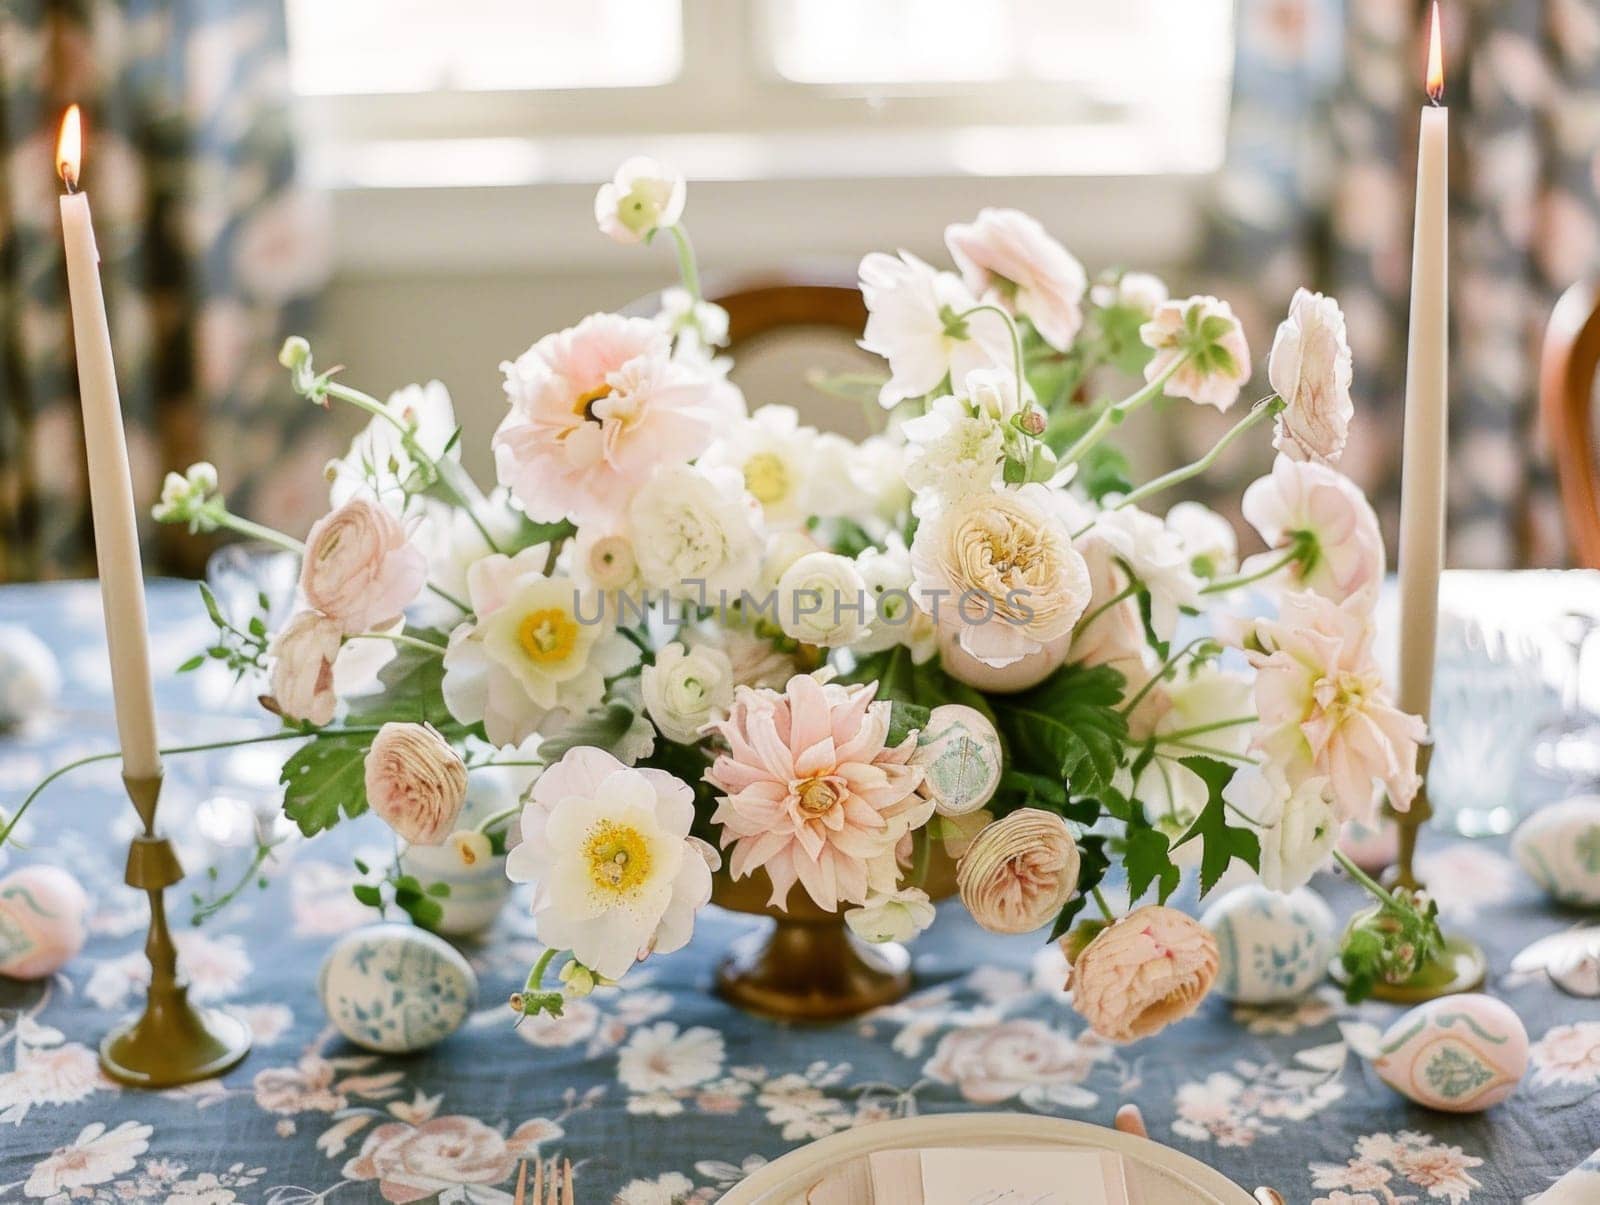 A beautiful vase filled with a variety of white and pink flowers sits gracefully on top of a table, adding a touch of sophistication to the room.